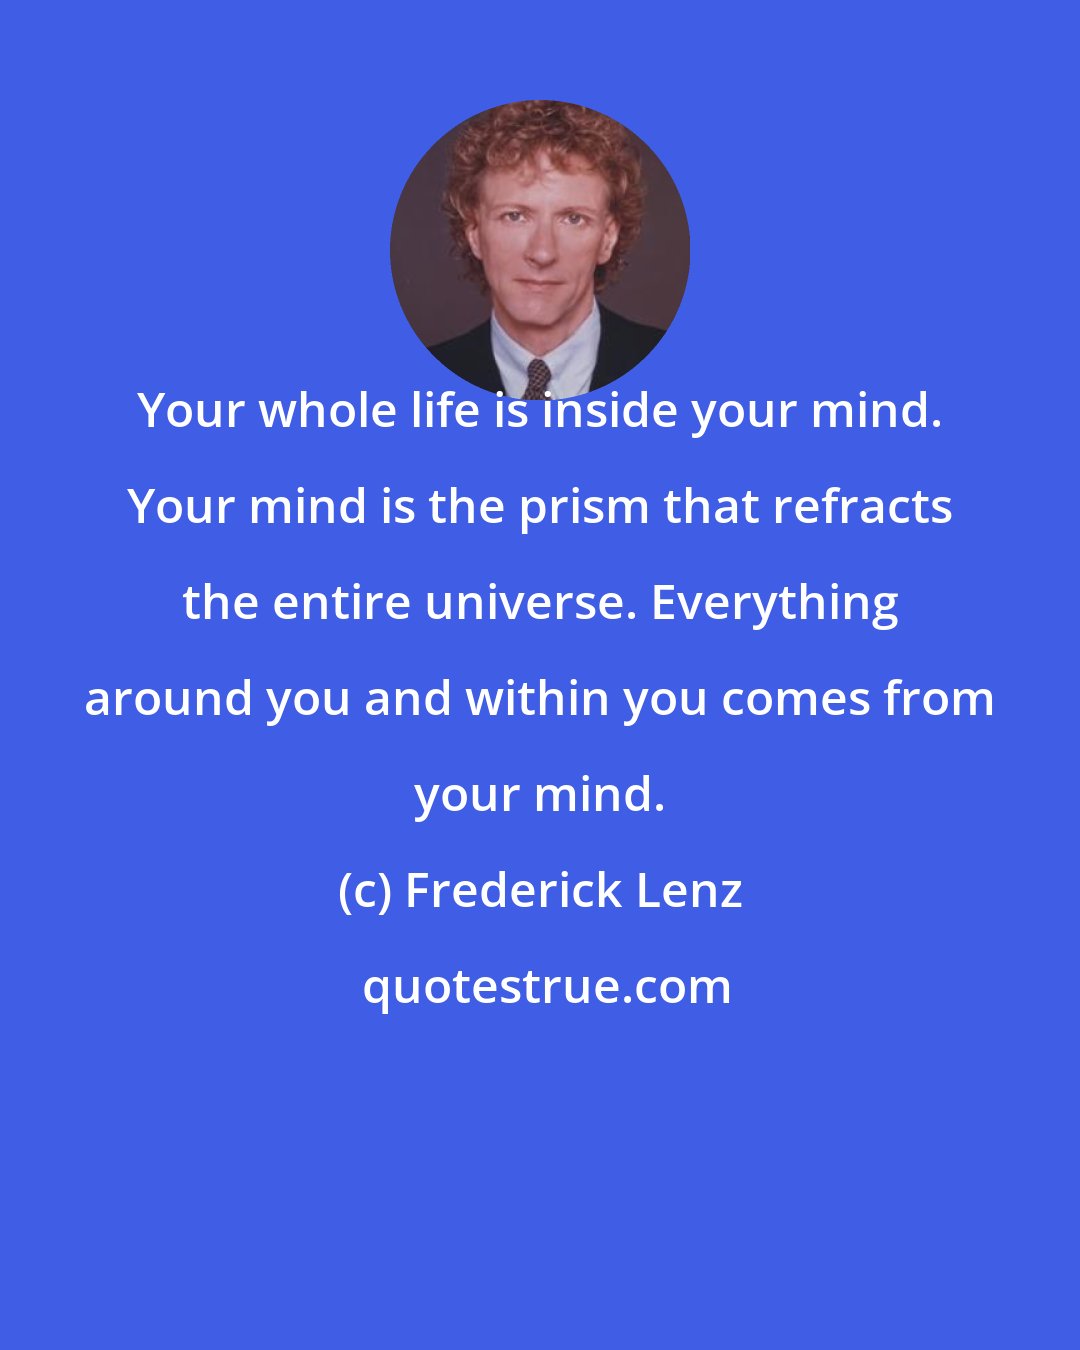 Frederick Lenz: Your whole life is inside your mind. Your mind is the prism that refracts the entire universe. Everything around you and within you comes from your mind.